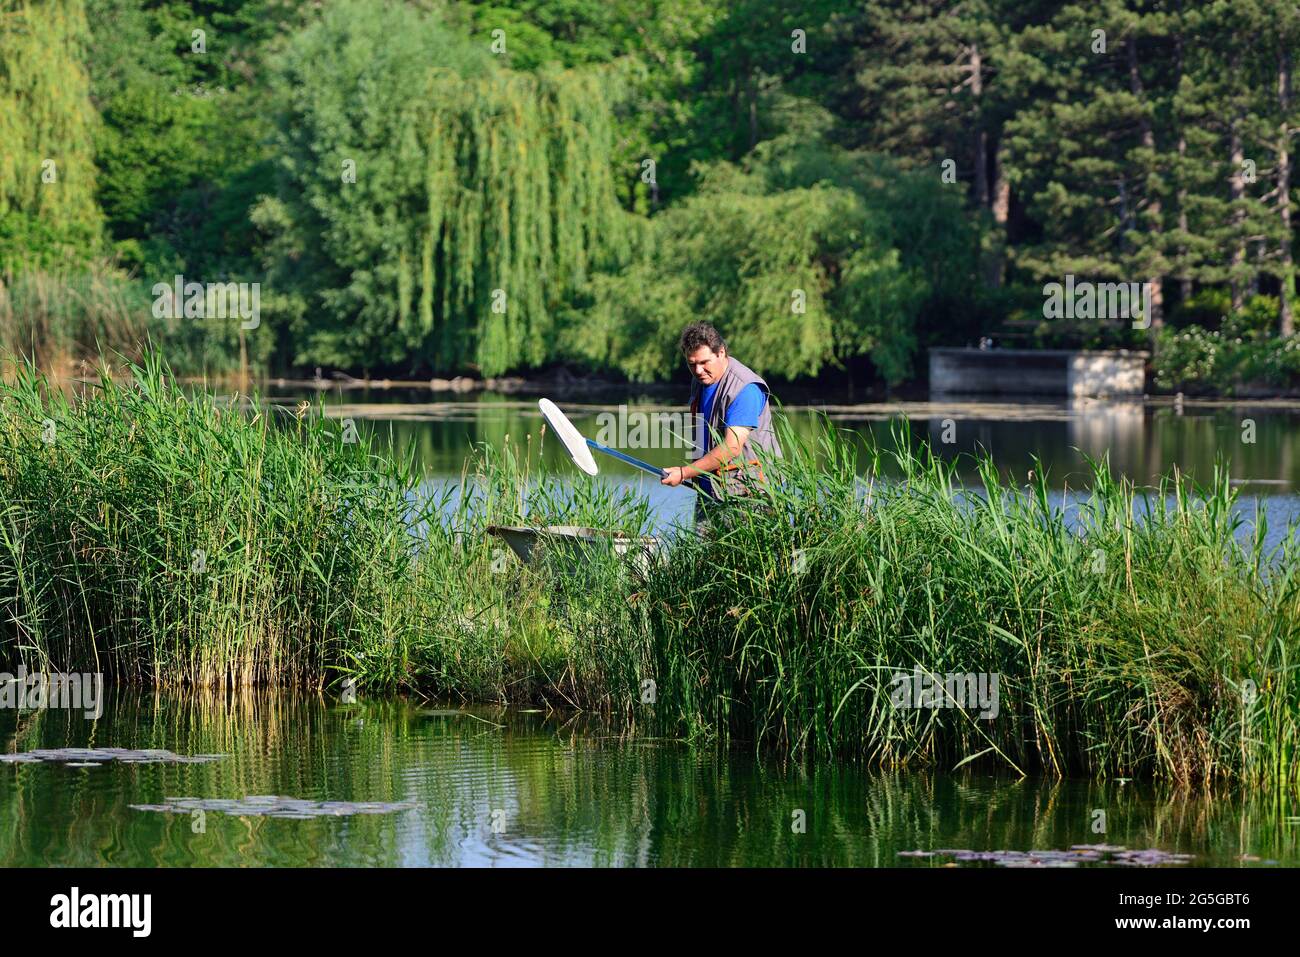 Vienna, Austria. Gardener cleans the water in the floridsdorf water park Stock Photo